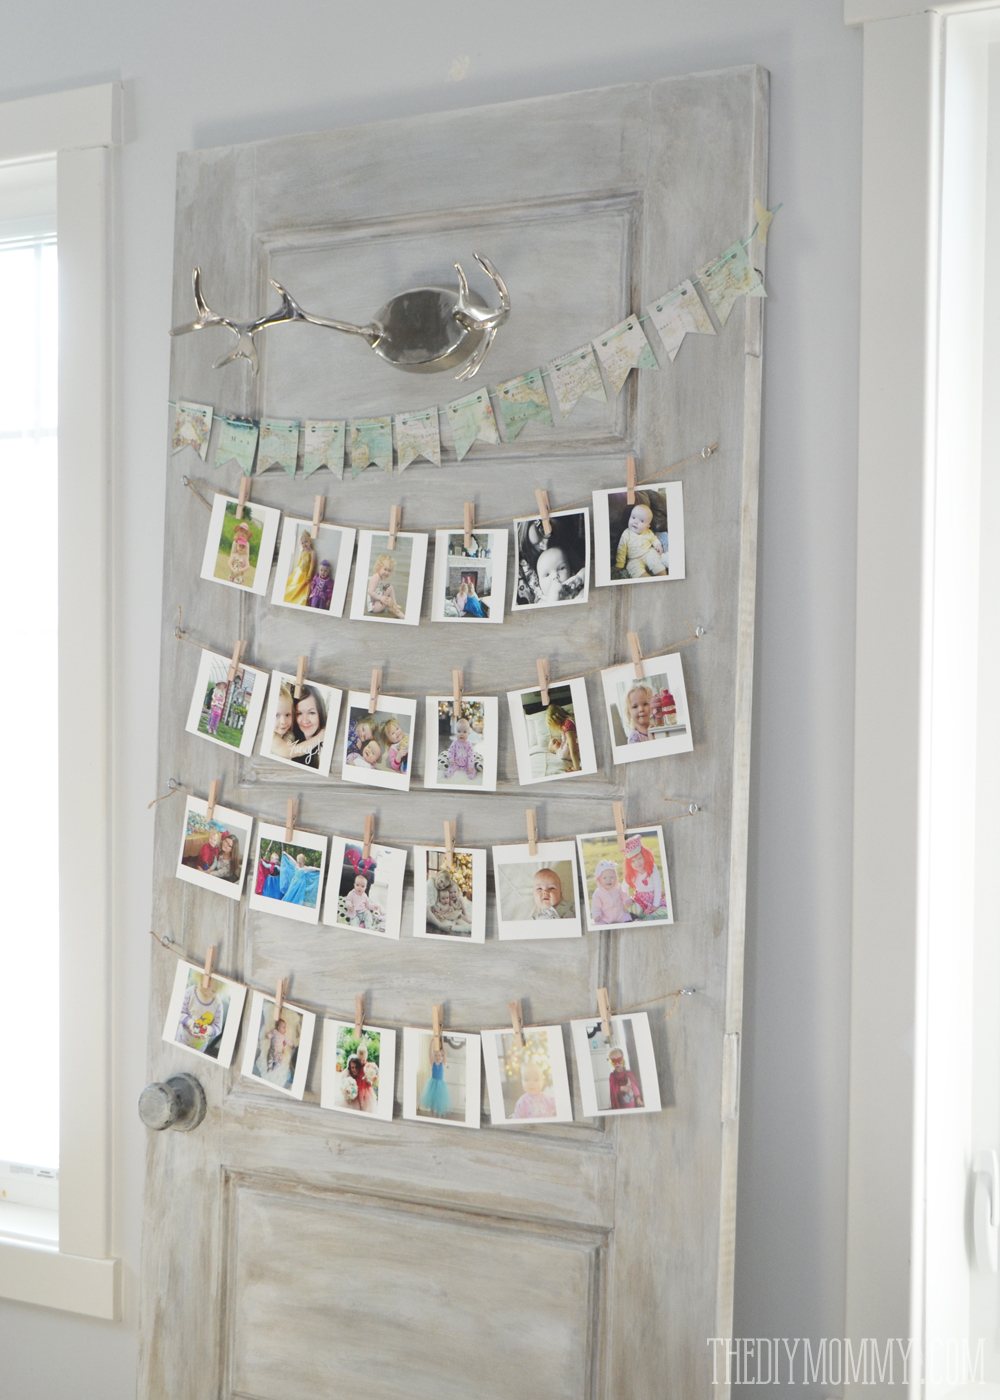 Unique and fun idea: display Instagram photos on an old door with twine and clothespins.